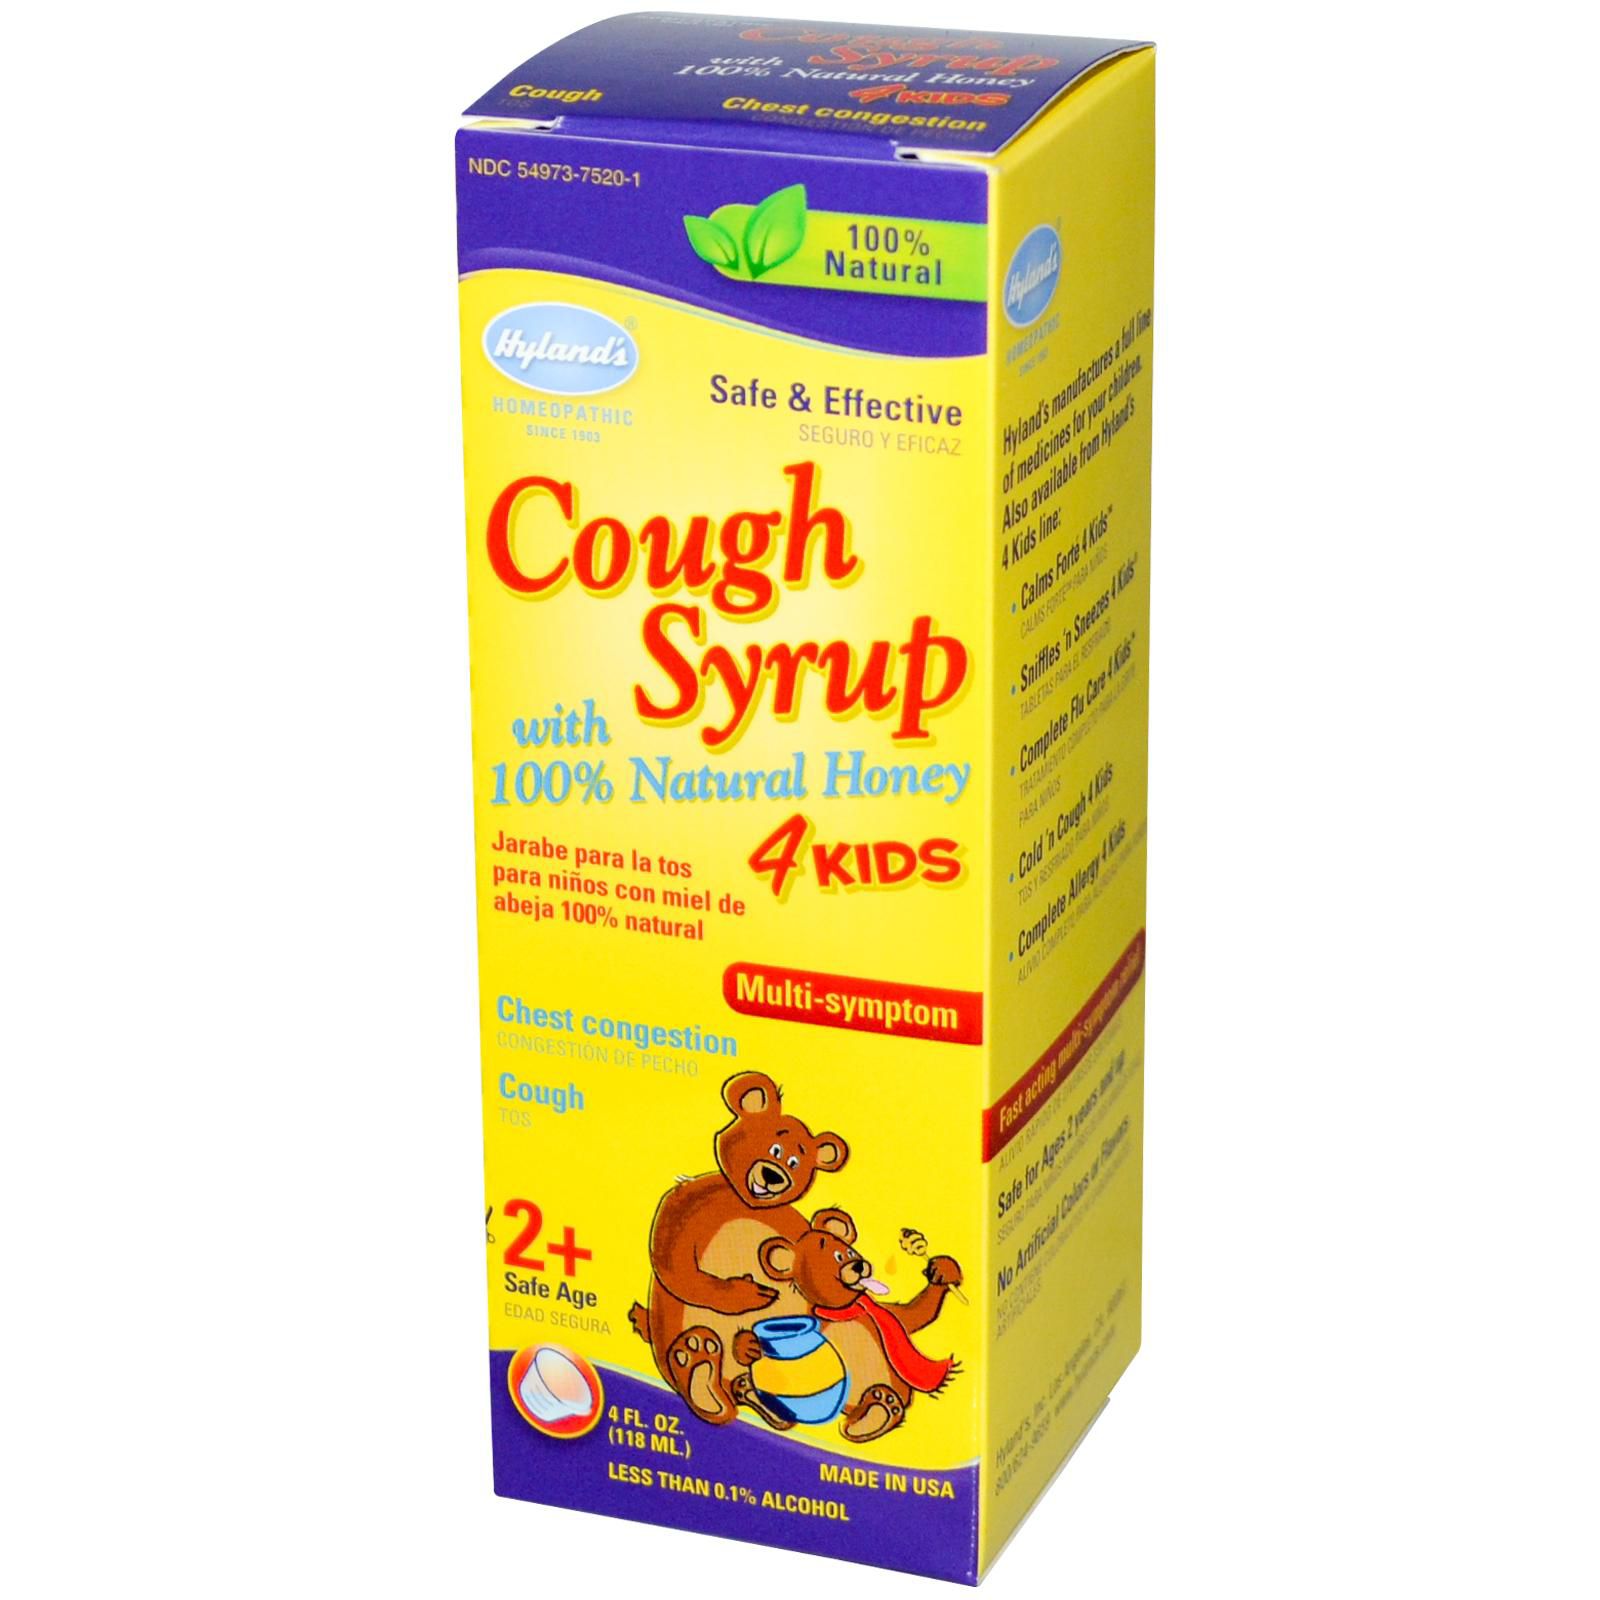 Homeopathic Cough Syrup With Honey 4 Kids 4 oz